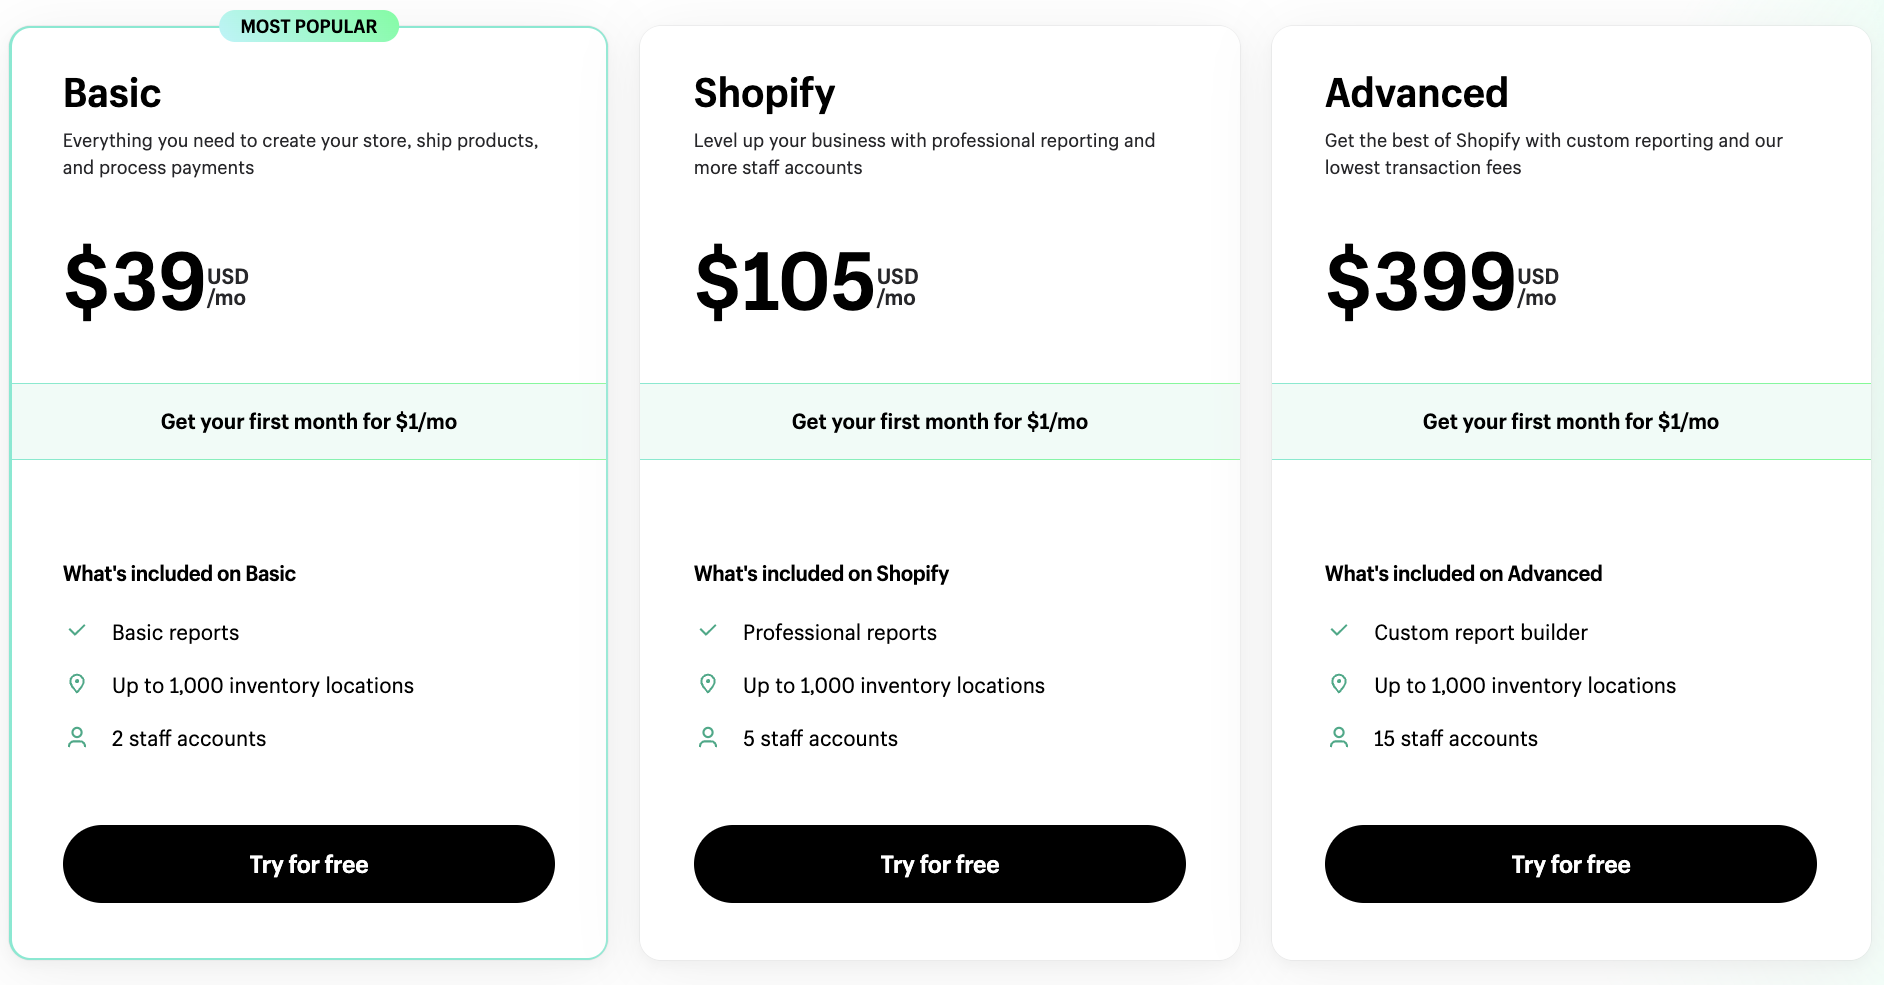 How to Pick the Best Shopify Plan for Your Business